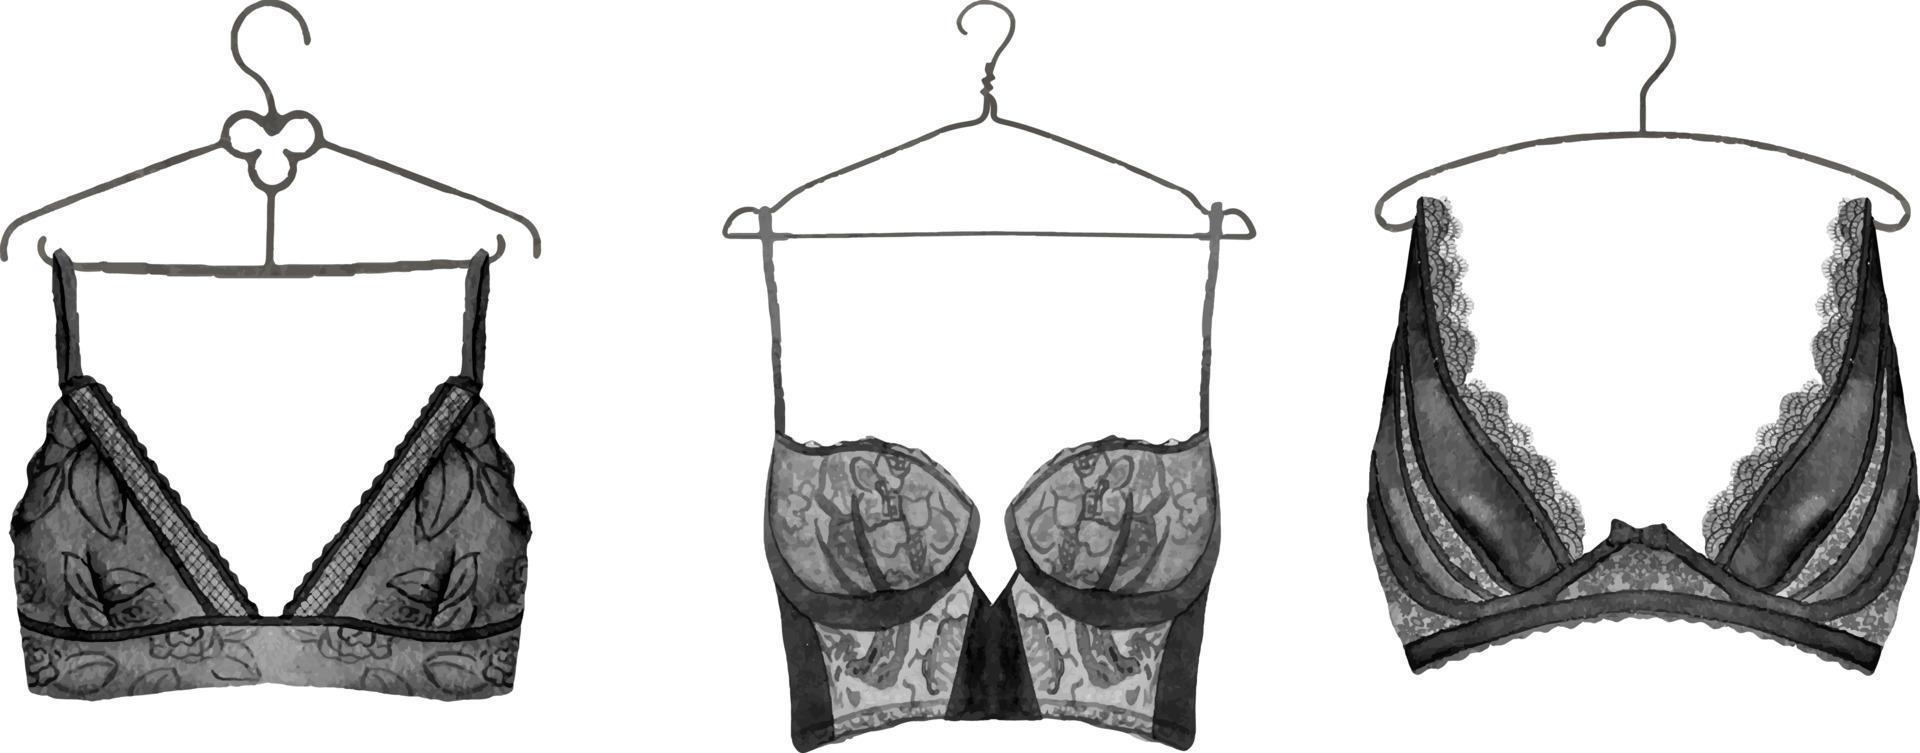 Watercolor black lace bras on hangers on white background, isolated watercolor illustration. Black bridal shower party lingerie set clipart vector